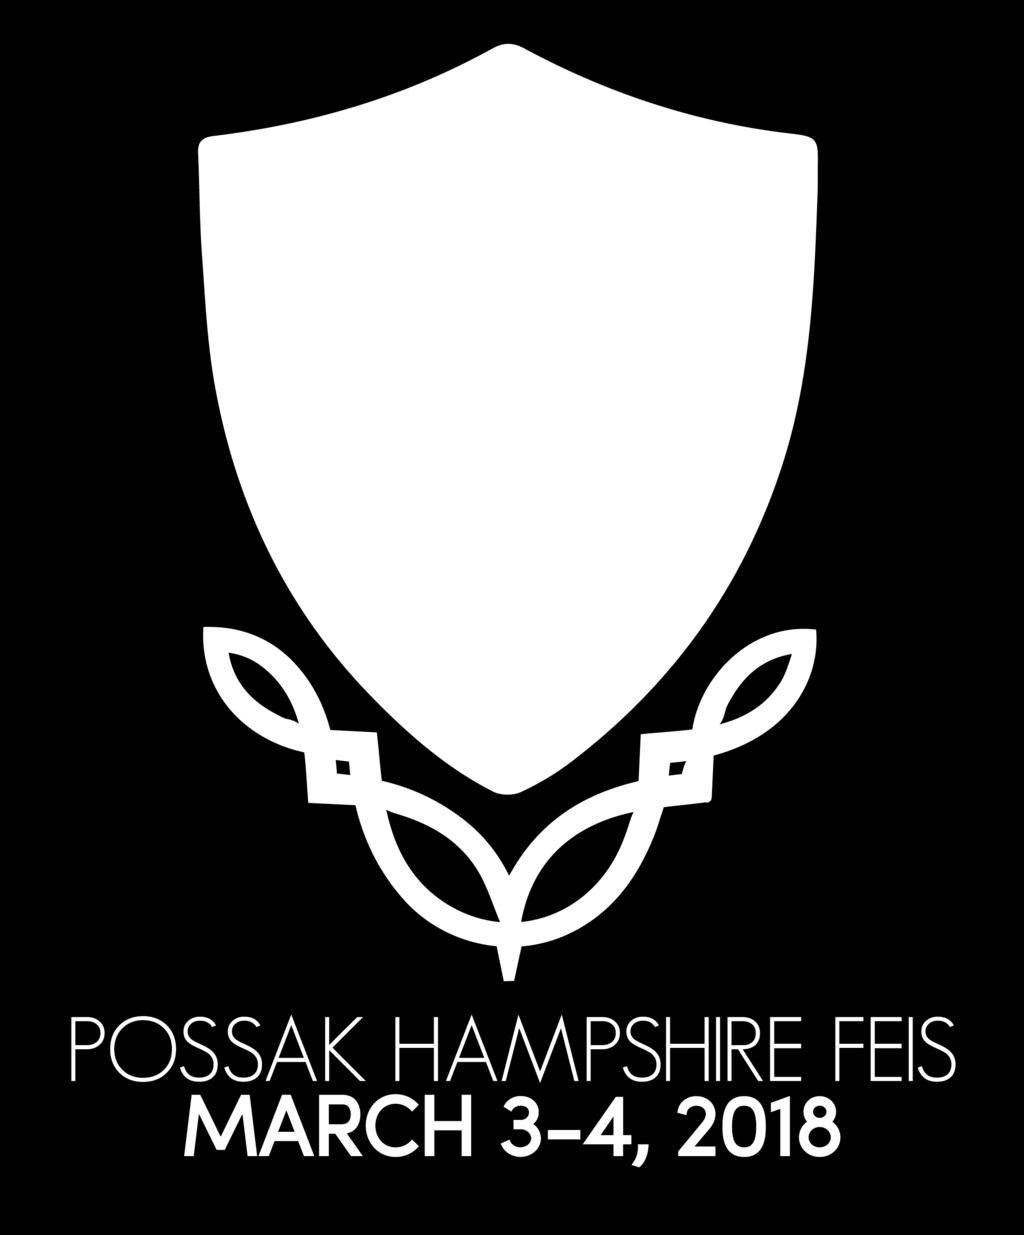 com Possak Hampshire Feis is registered with the